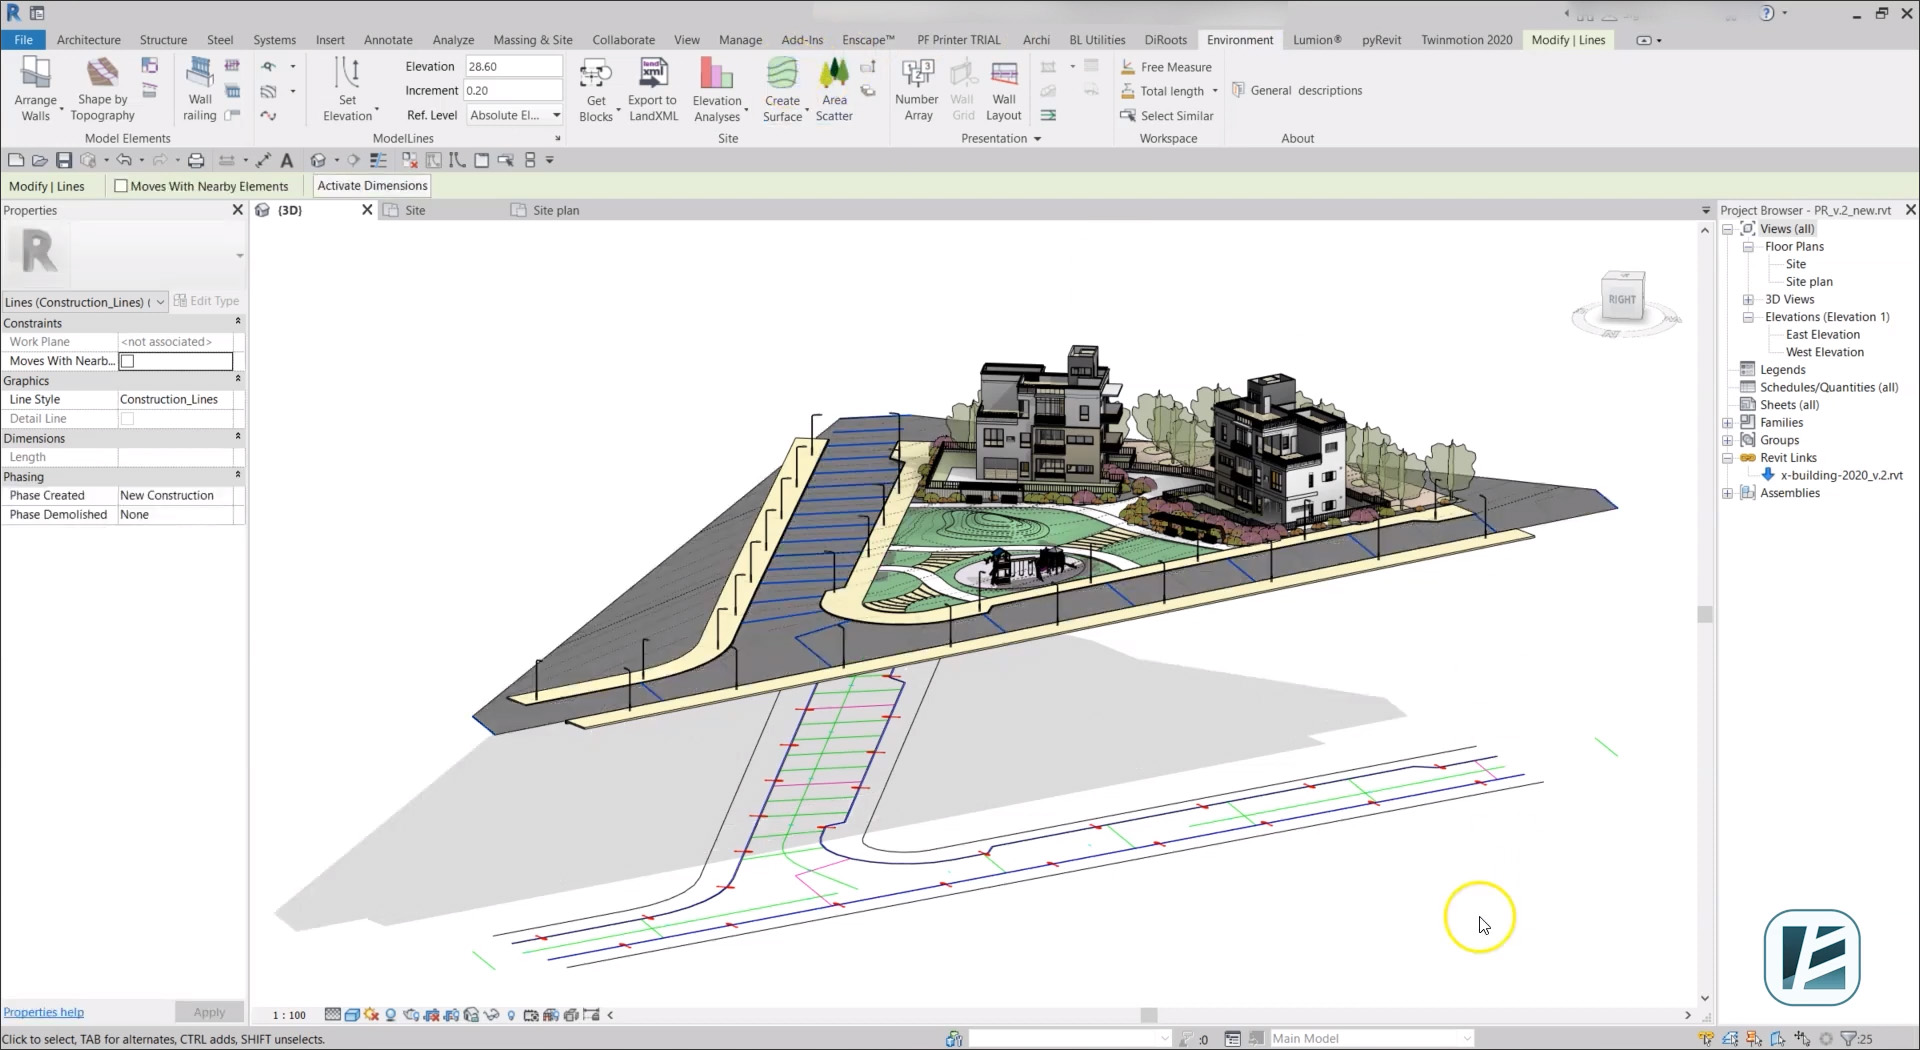 MG and Arch-Intelligence Announce Partnership Integrating Autodesk Revit Capabilities into Landscape Design